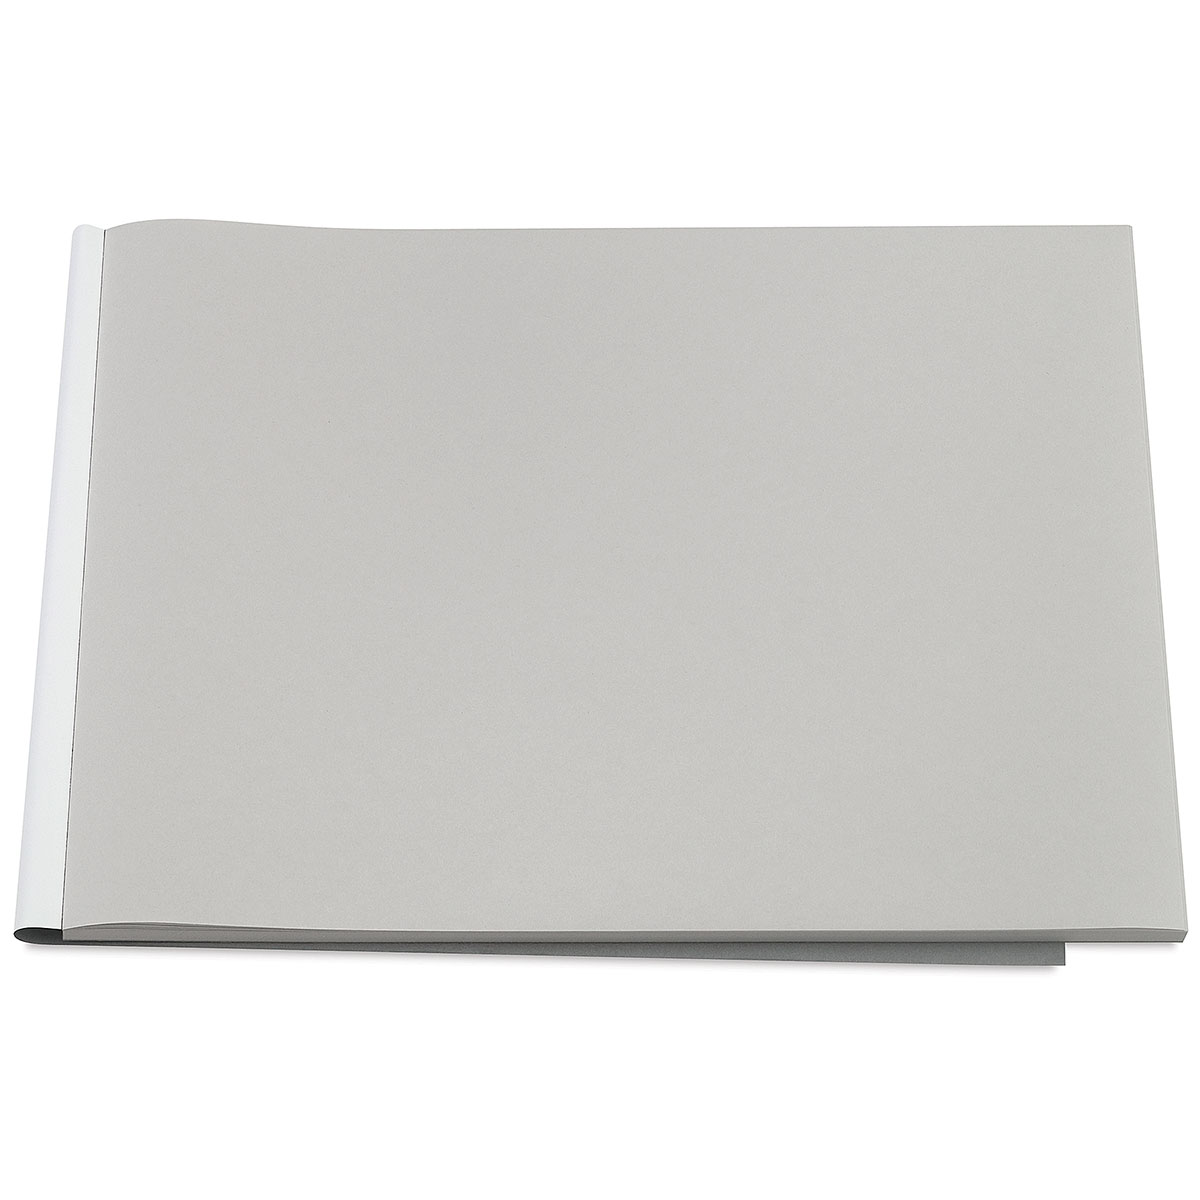 Blick Studio Newsprint Pad - 24 inch x 36 inch, 50 Sheets, Other